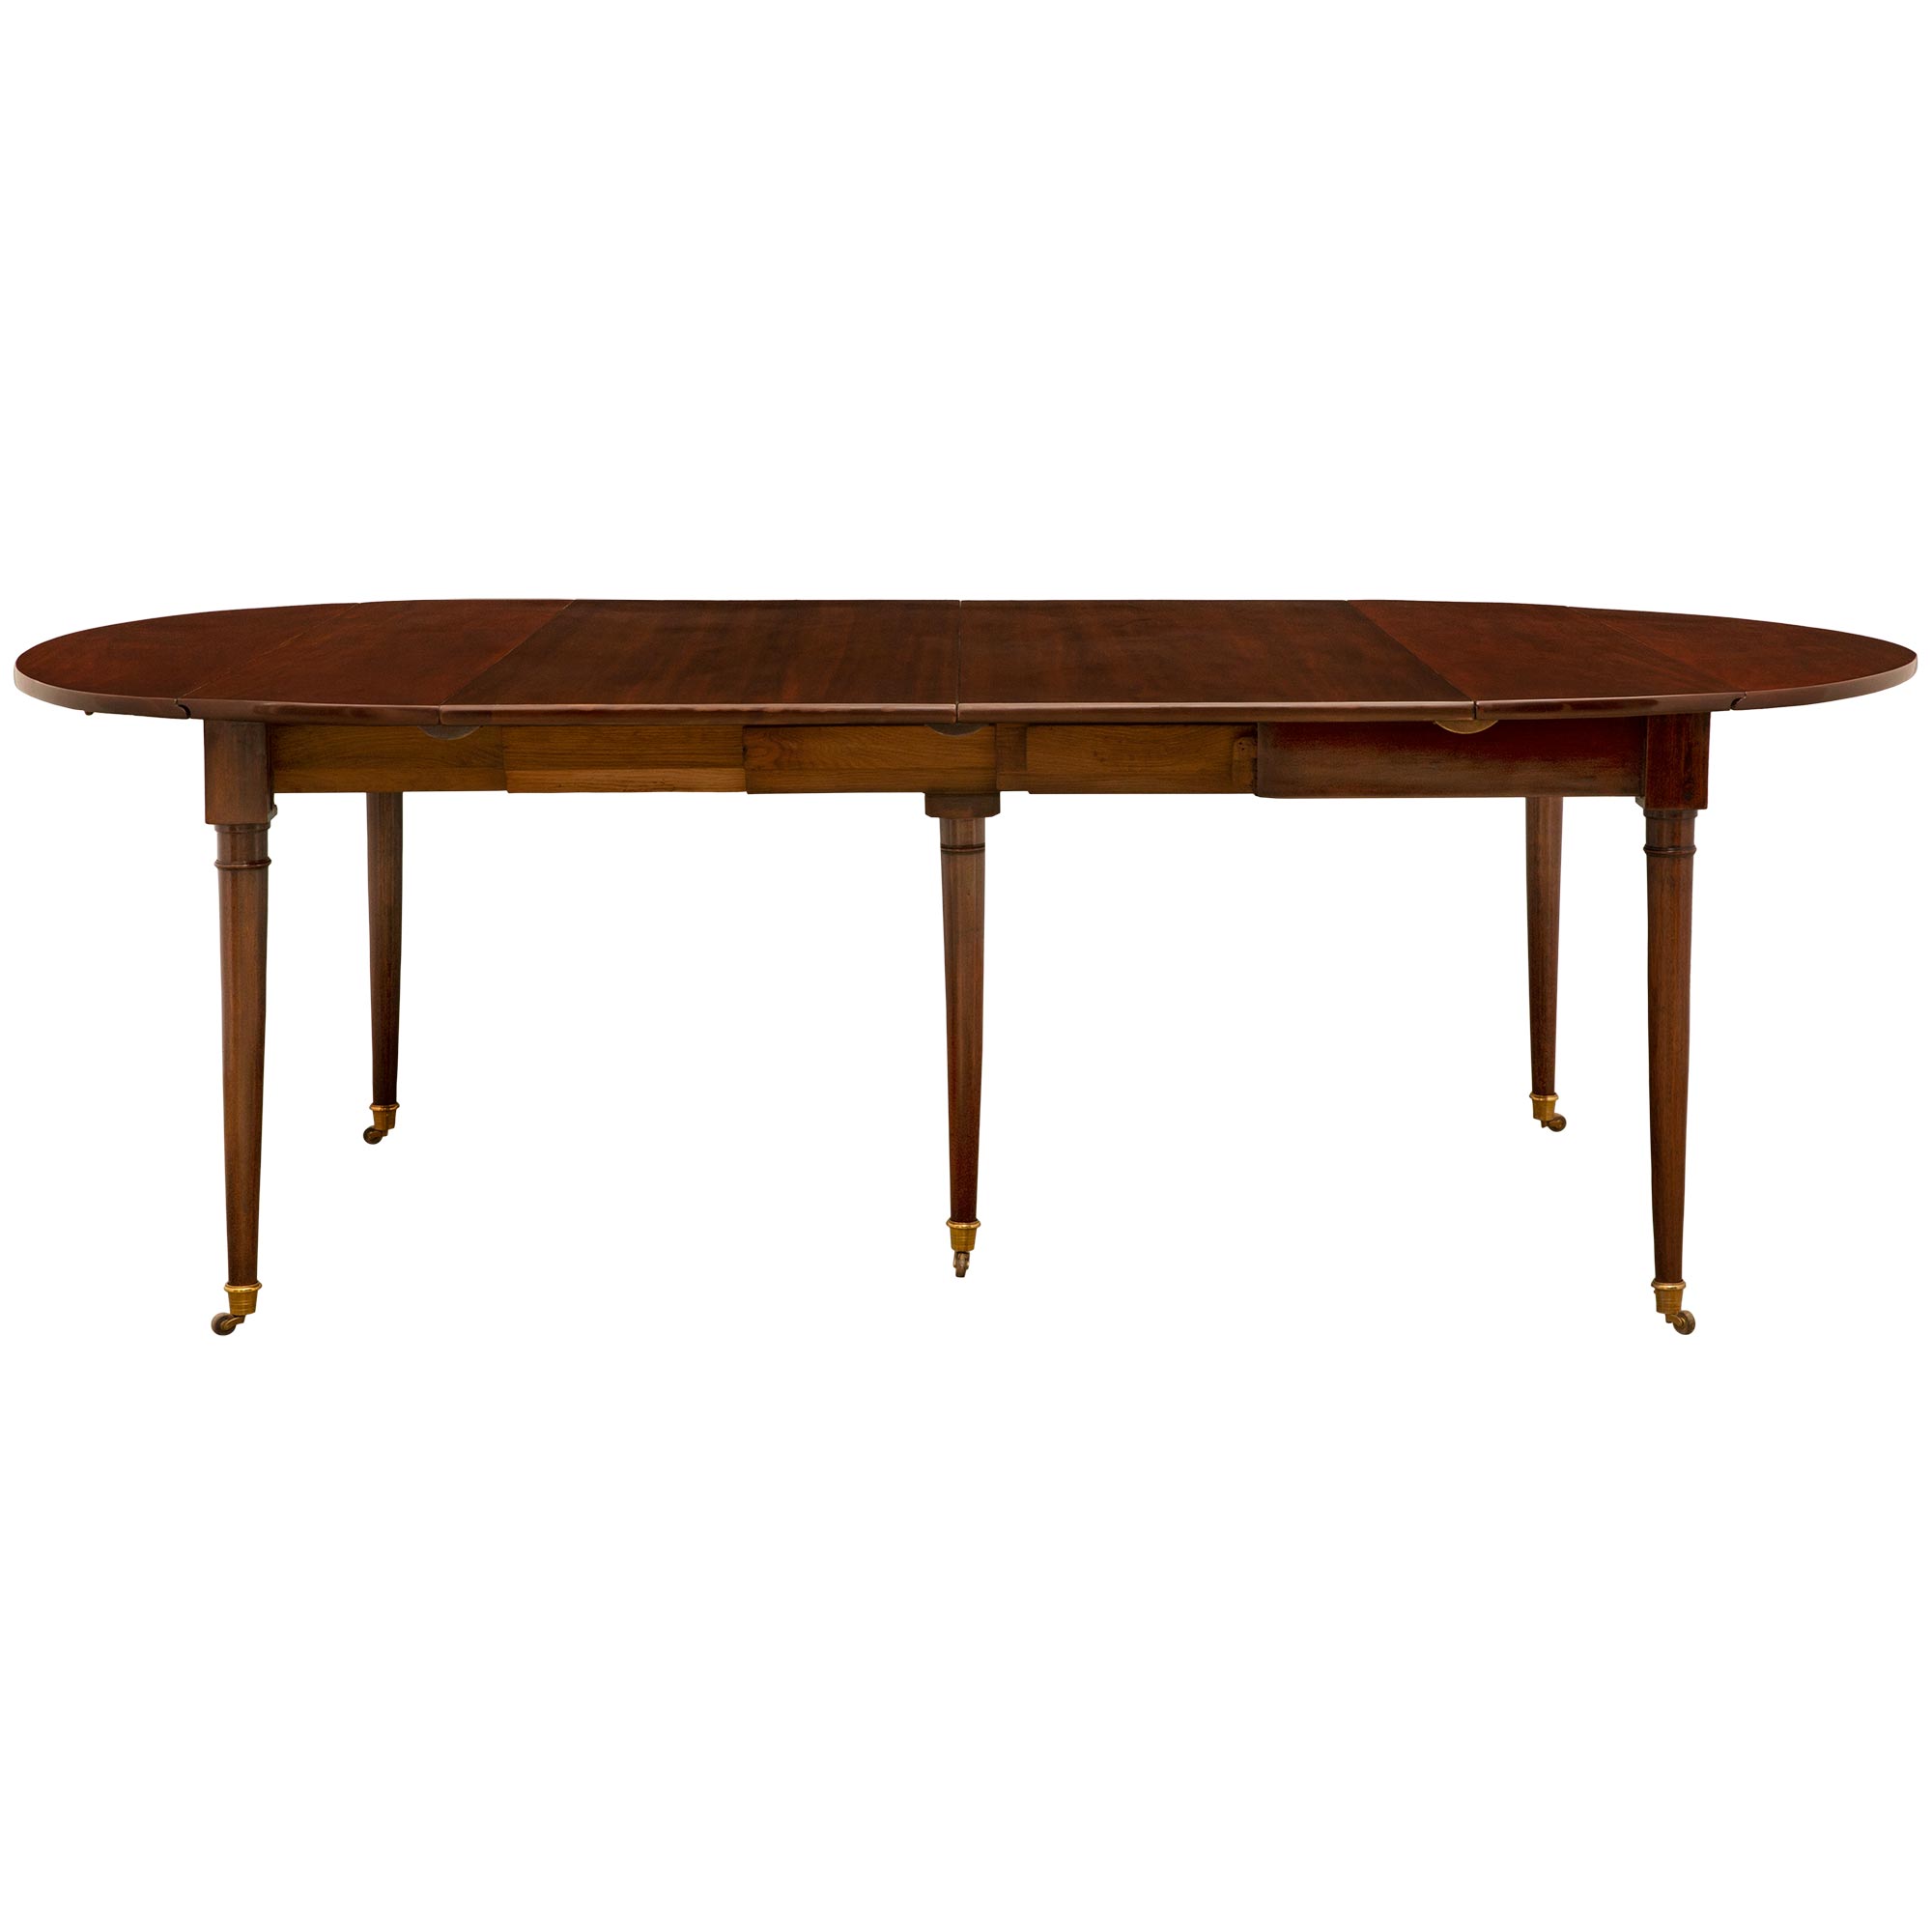 Early 19th Century French Louis XVI Style Mahogany Drop-Leaf Dining Table